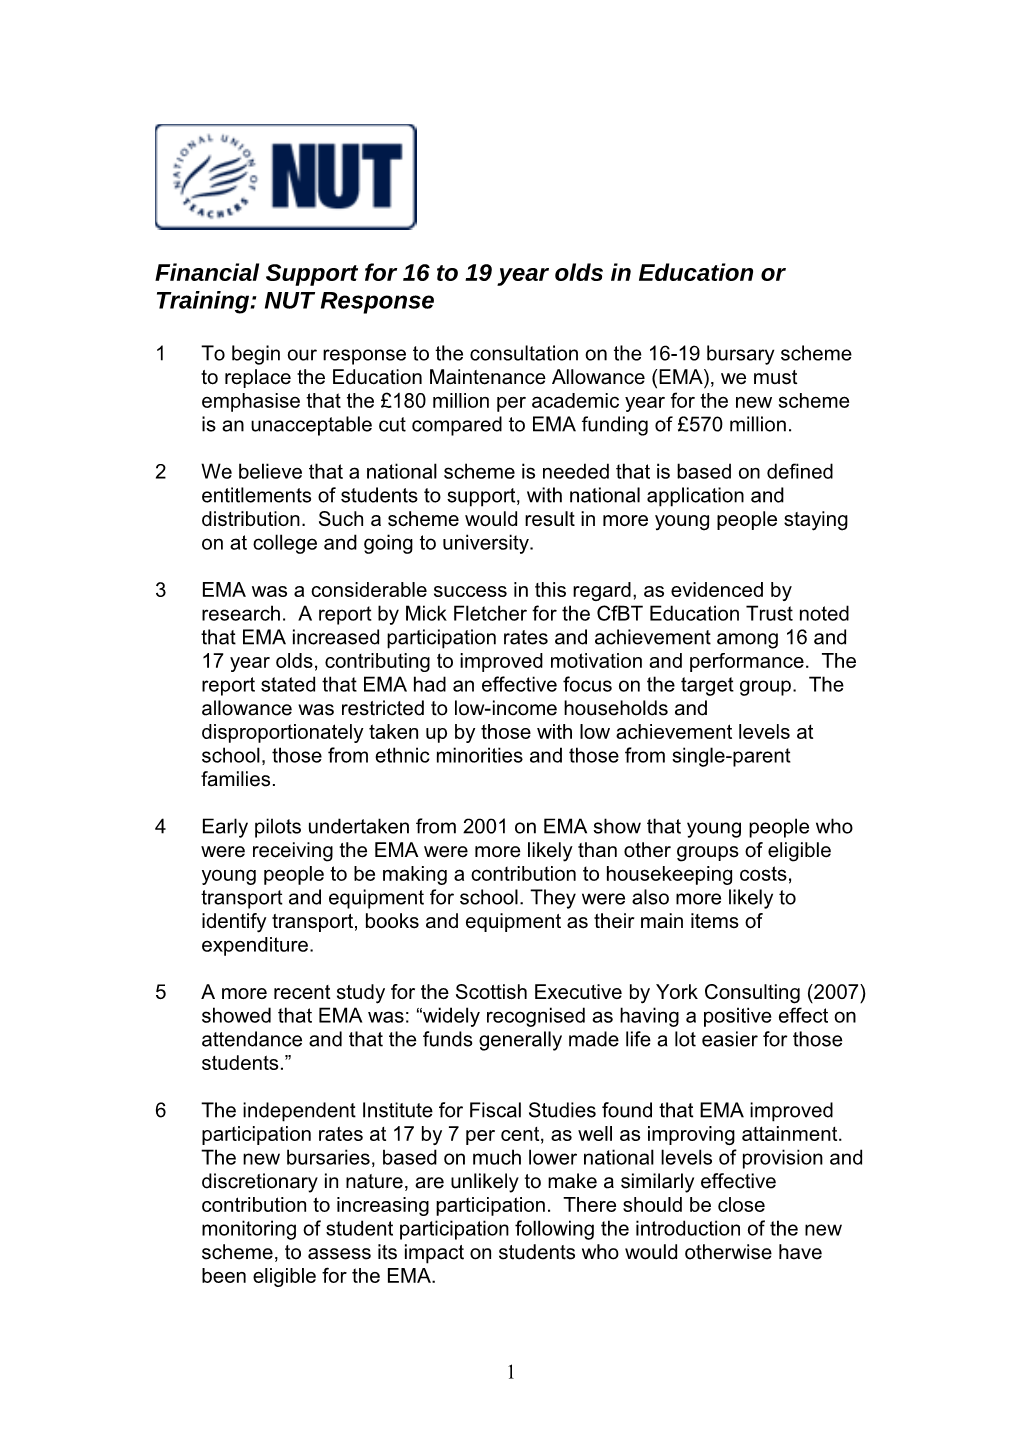 Financial Support for 16-19 Year Olds in Education Or Training: NUT Response